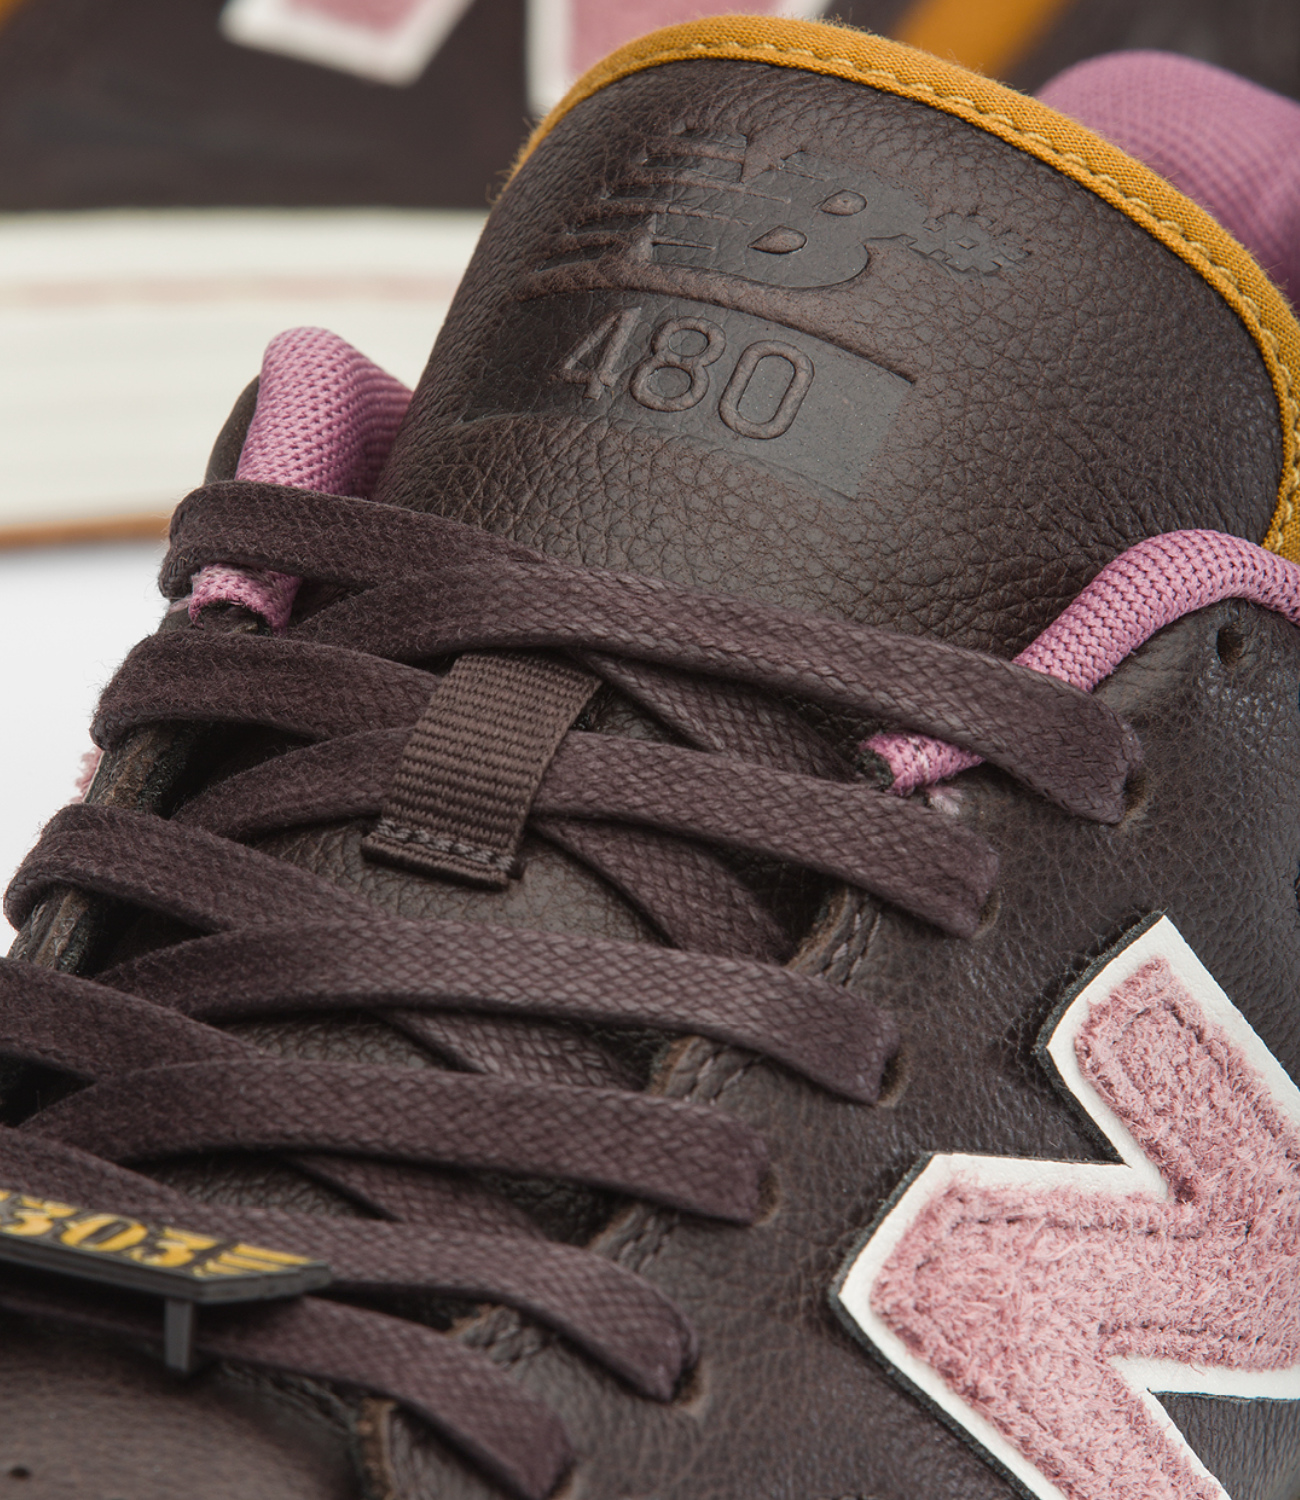 new balance 480 skate sneakers release information